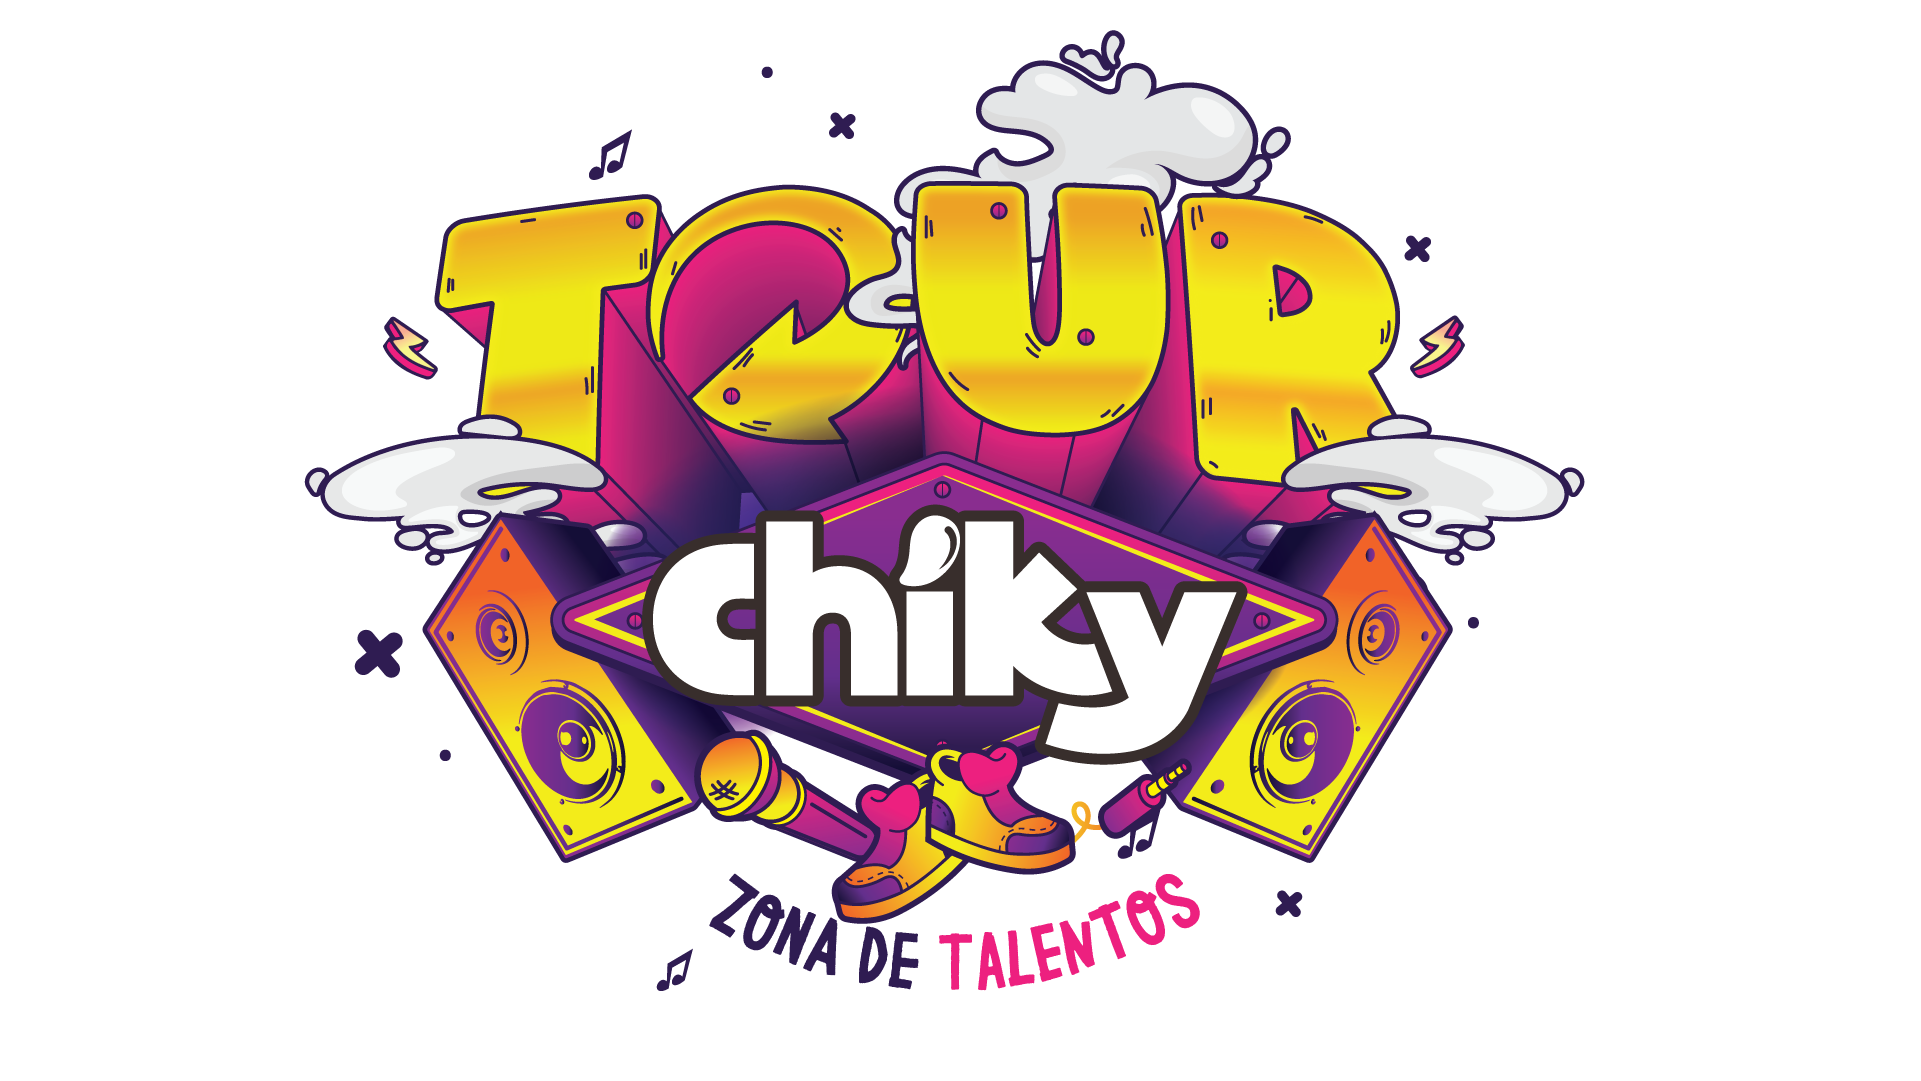 tour chiky